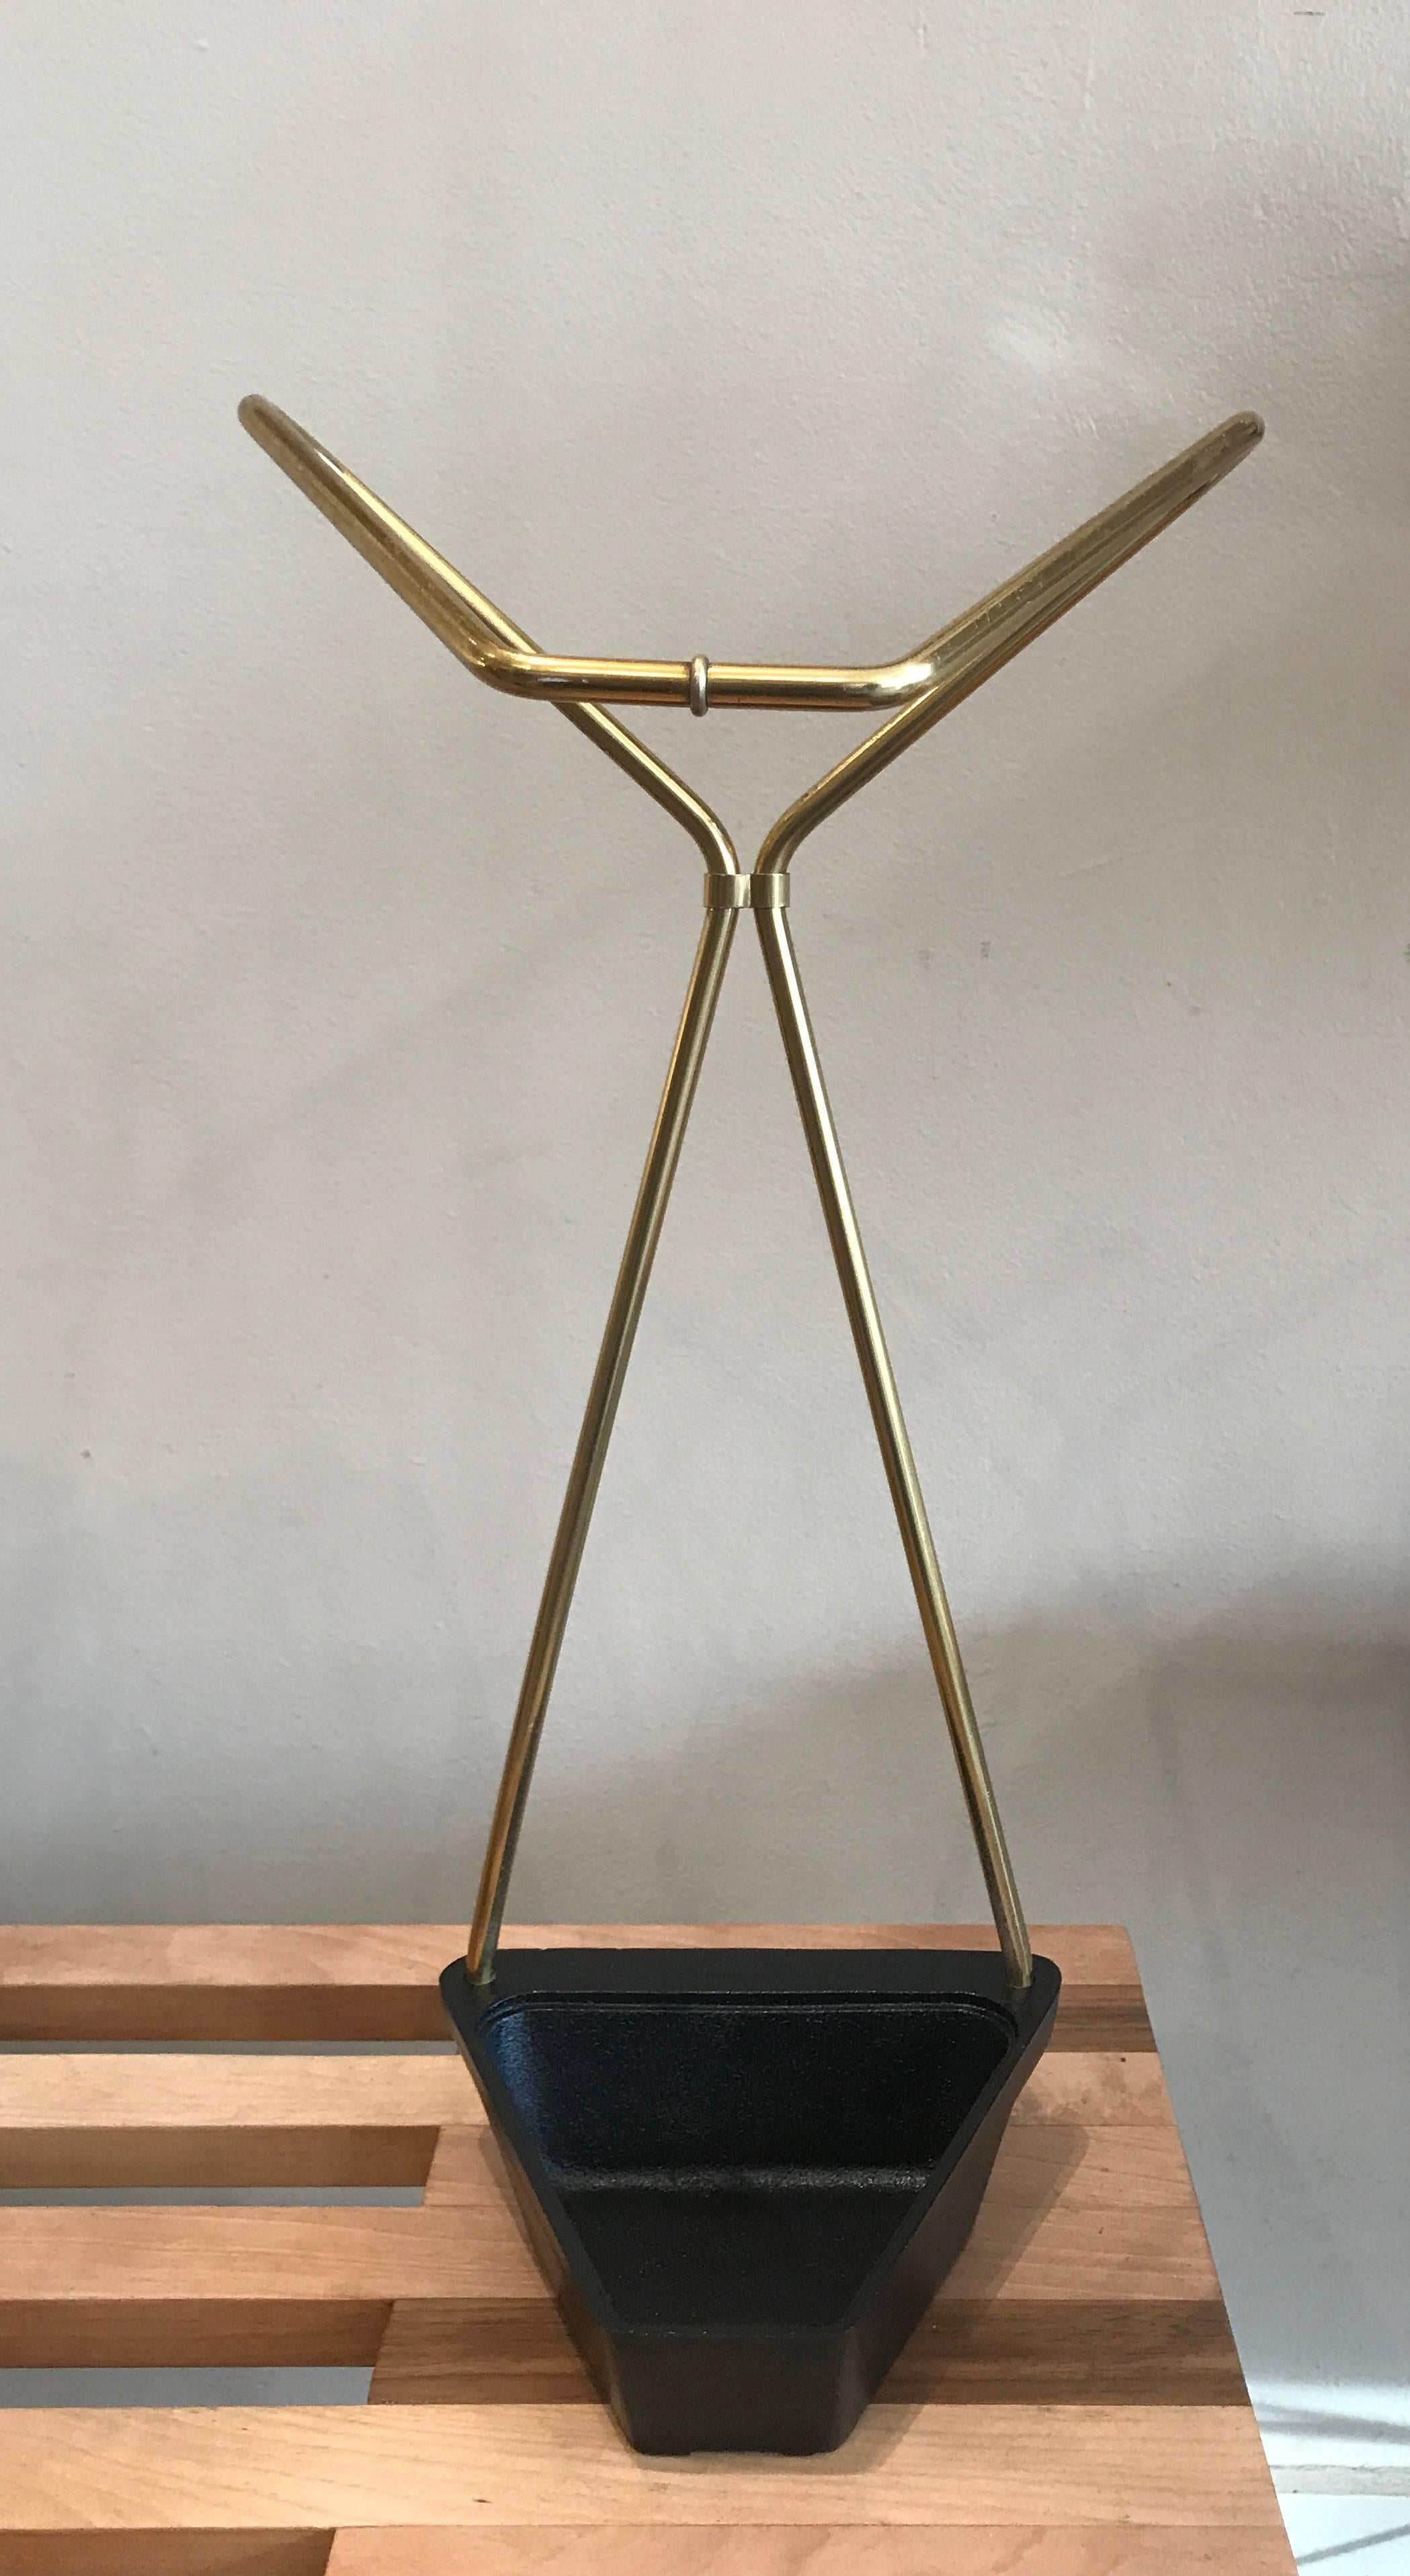 Ultra simple modernist umbrella stand in bent brass rod with a cast iron base.